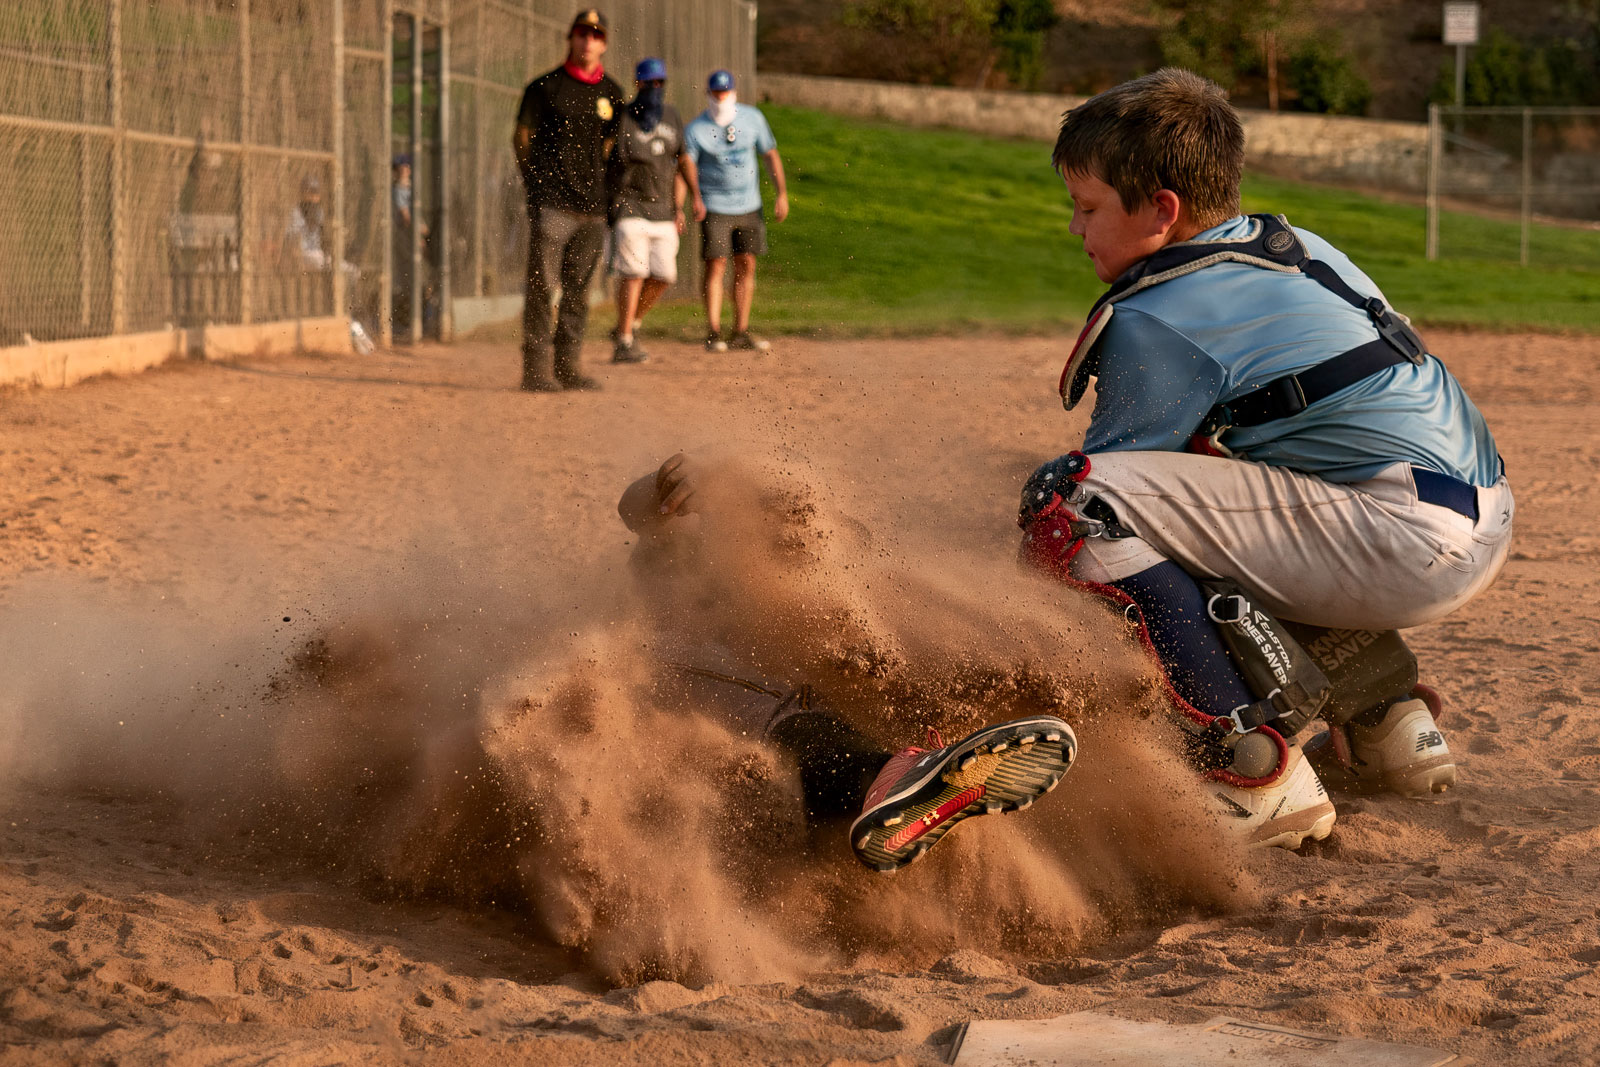 A young player with the South Bay Hawks slides into home plate as an opponent with the Santa Monica Zephyrs applies the tag during the Craig Outlaw Tournament 11U game between the Santa Monica Zephyrs and the South Bay Hawks at Edward Vincent Junior Park in Inglewood, California